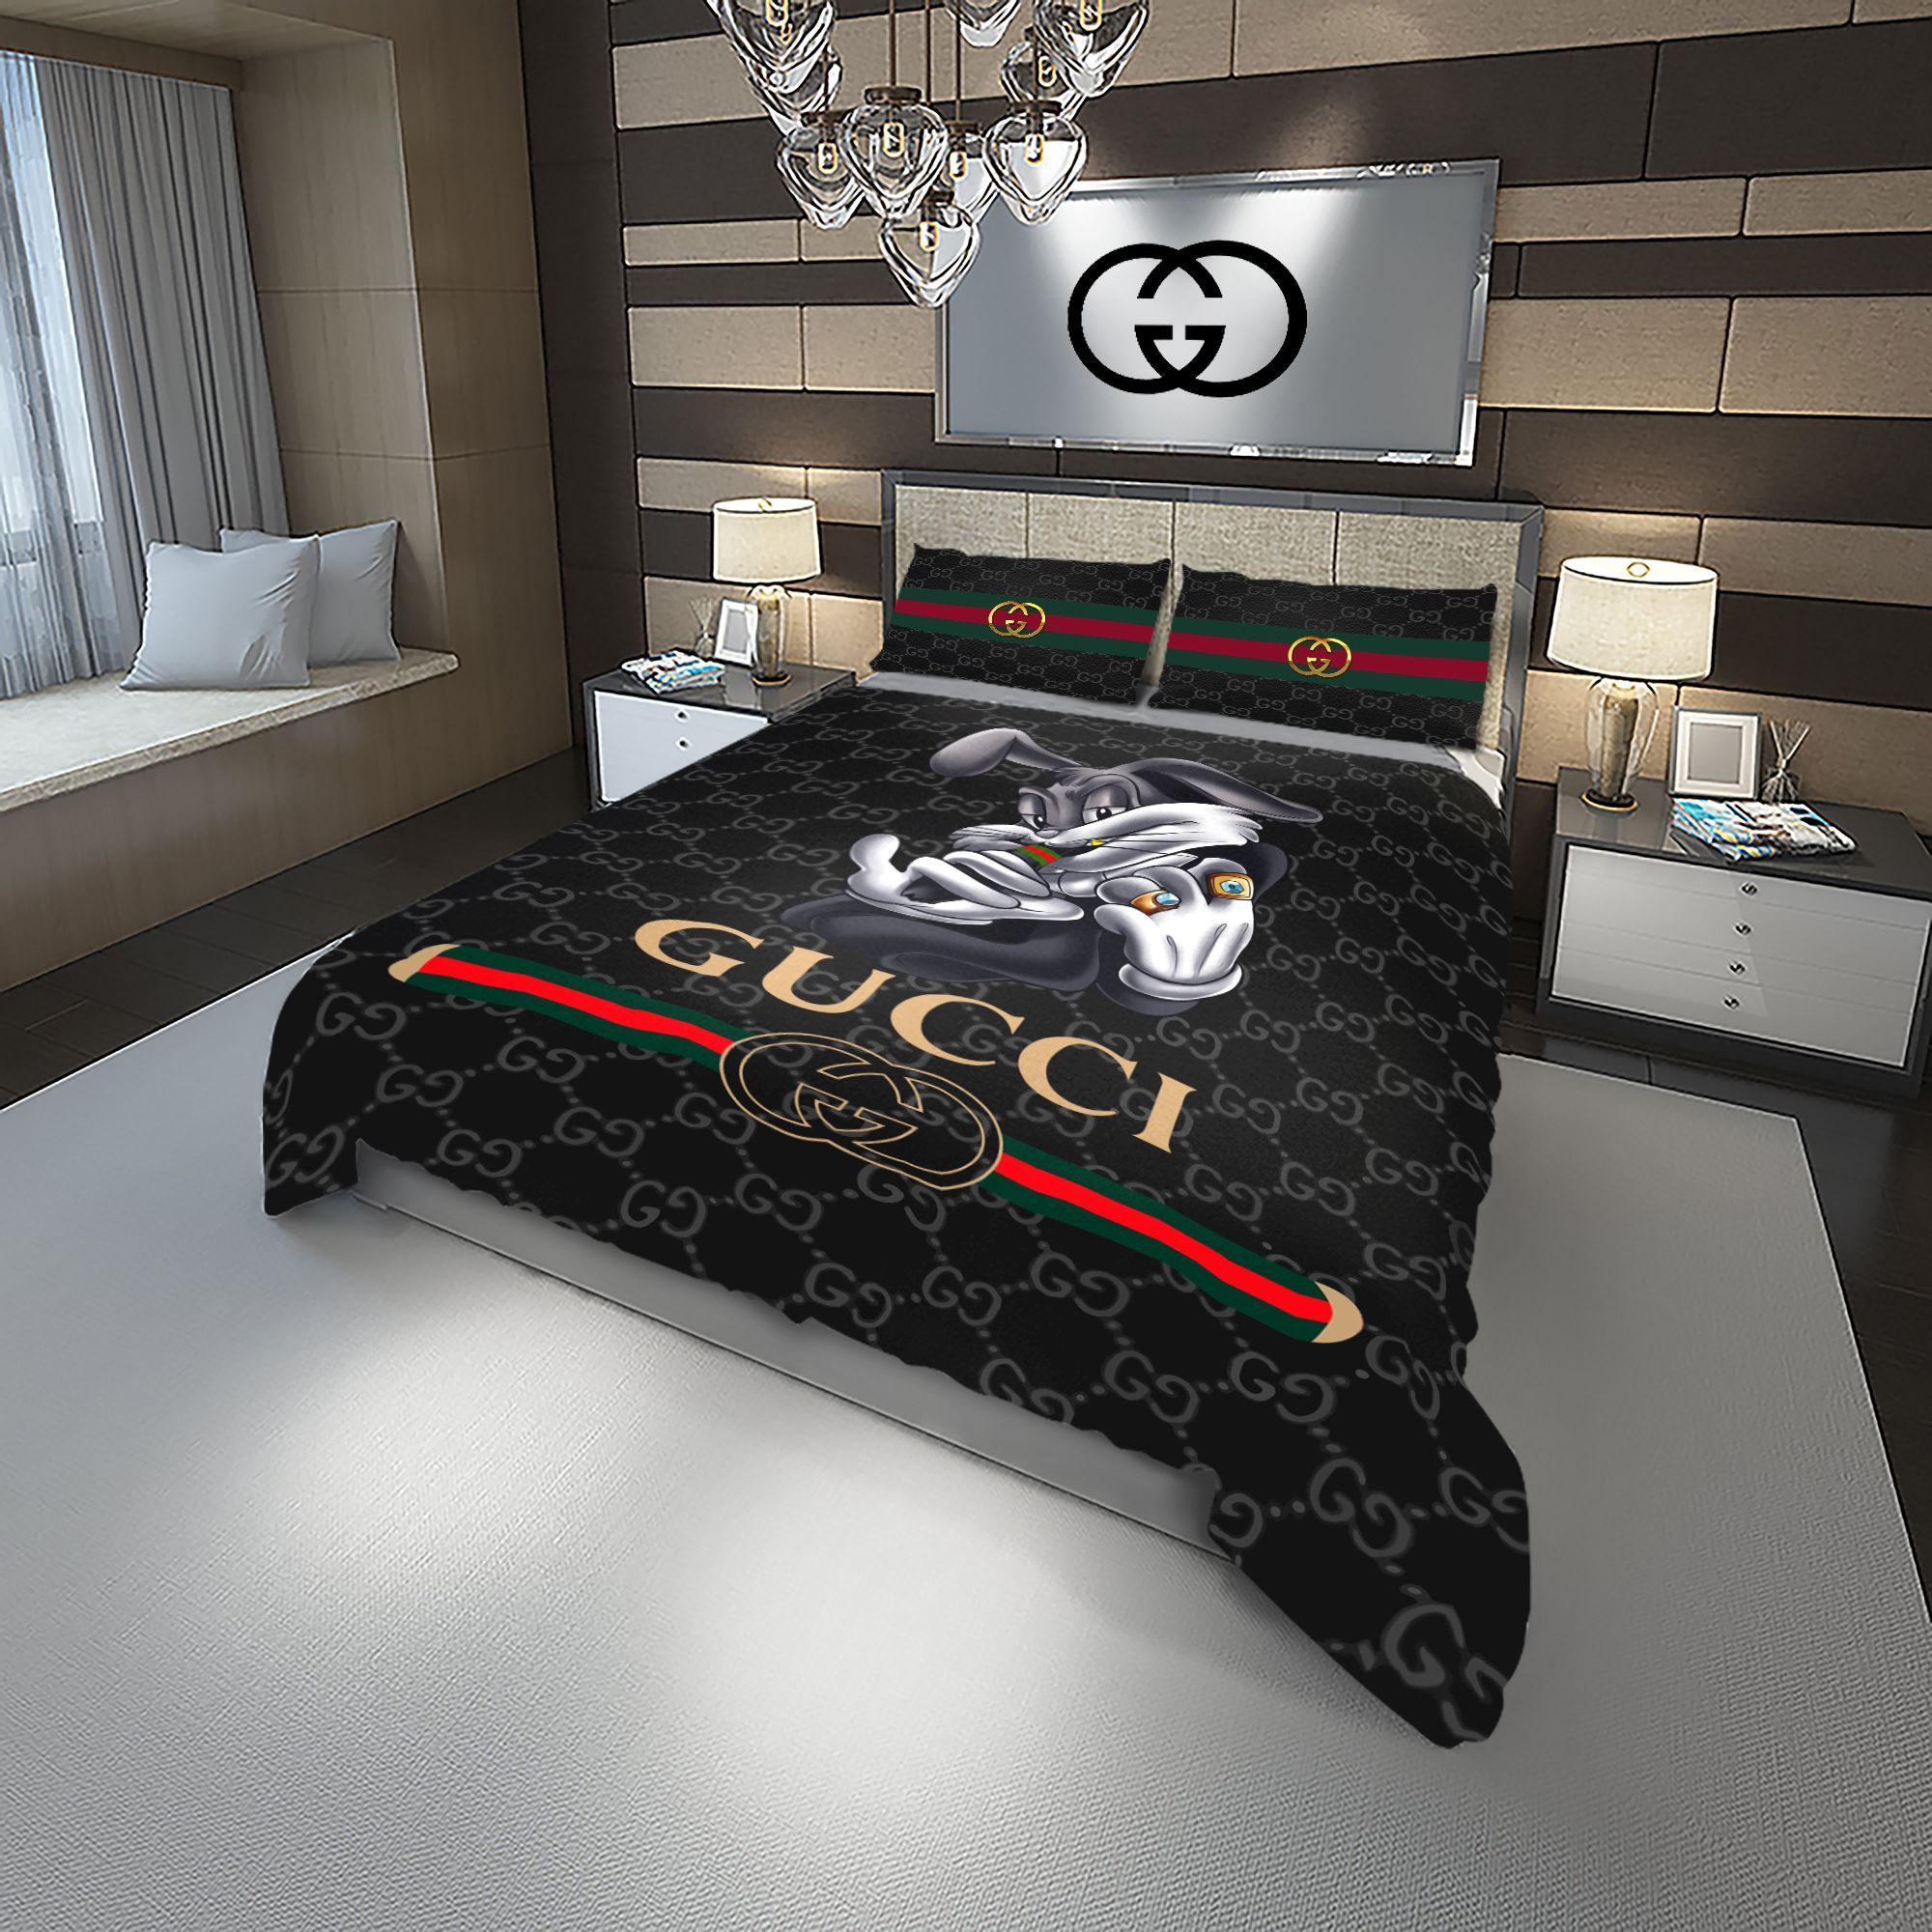 Let me show you about some luxury brand bedding set 2022 177